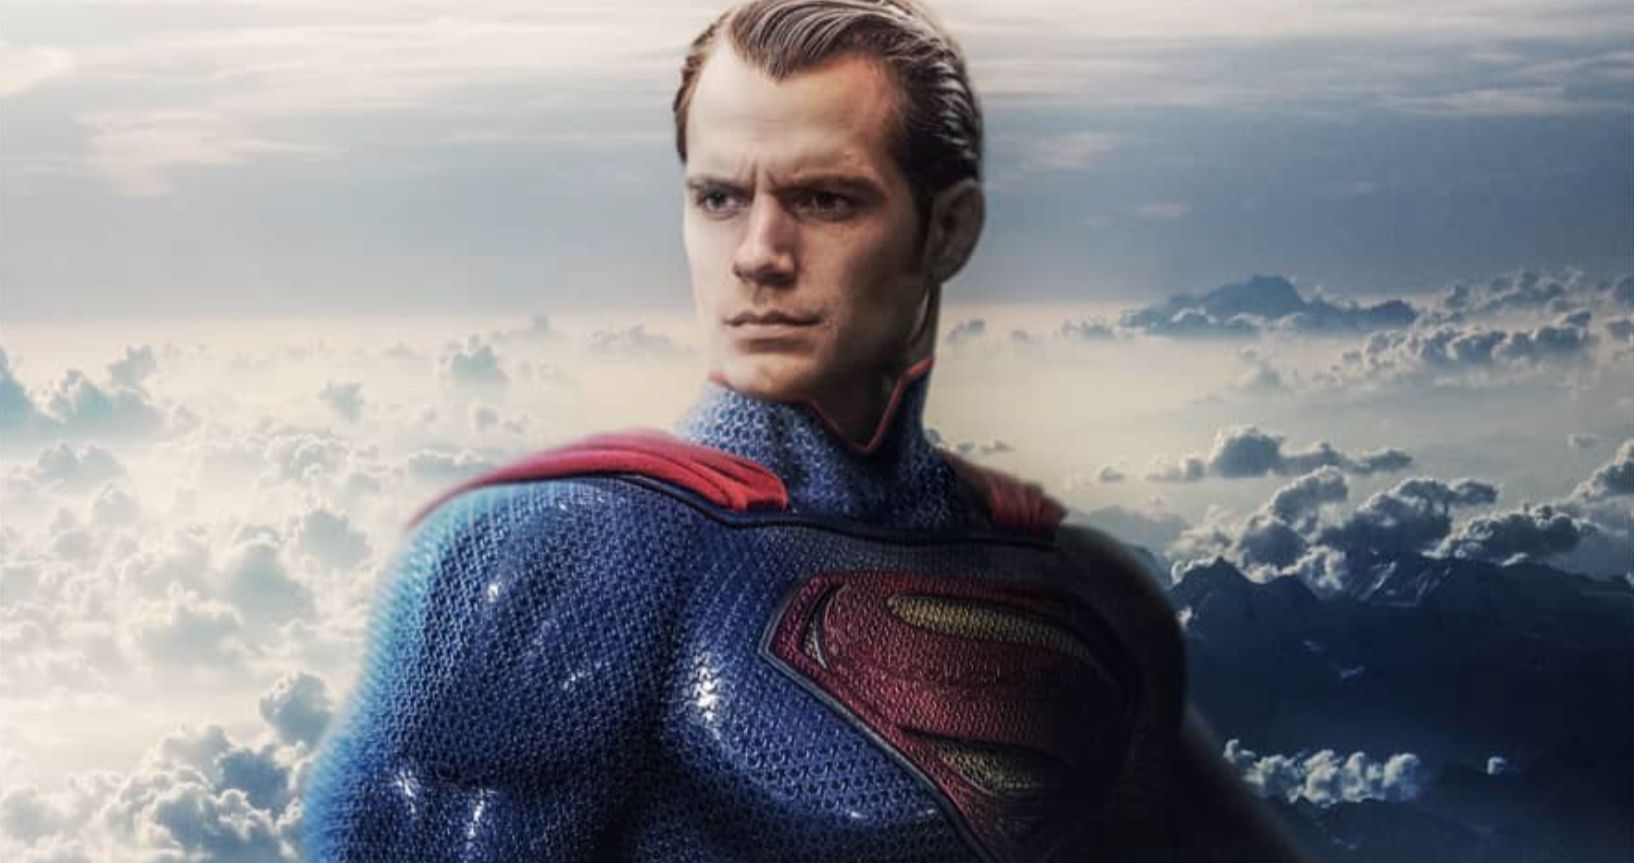 Henry Cavill Gets a New Superman Look for His Return in Man of